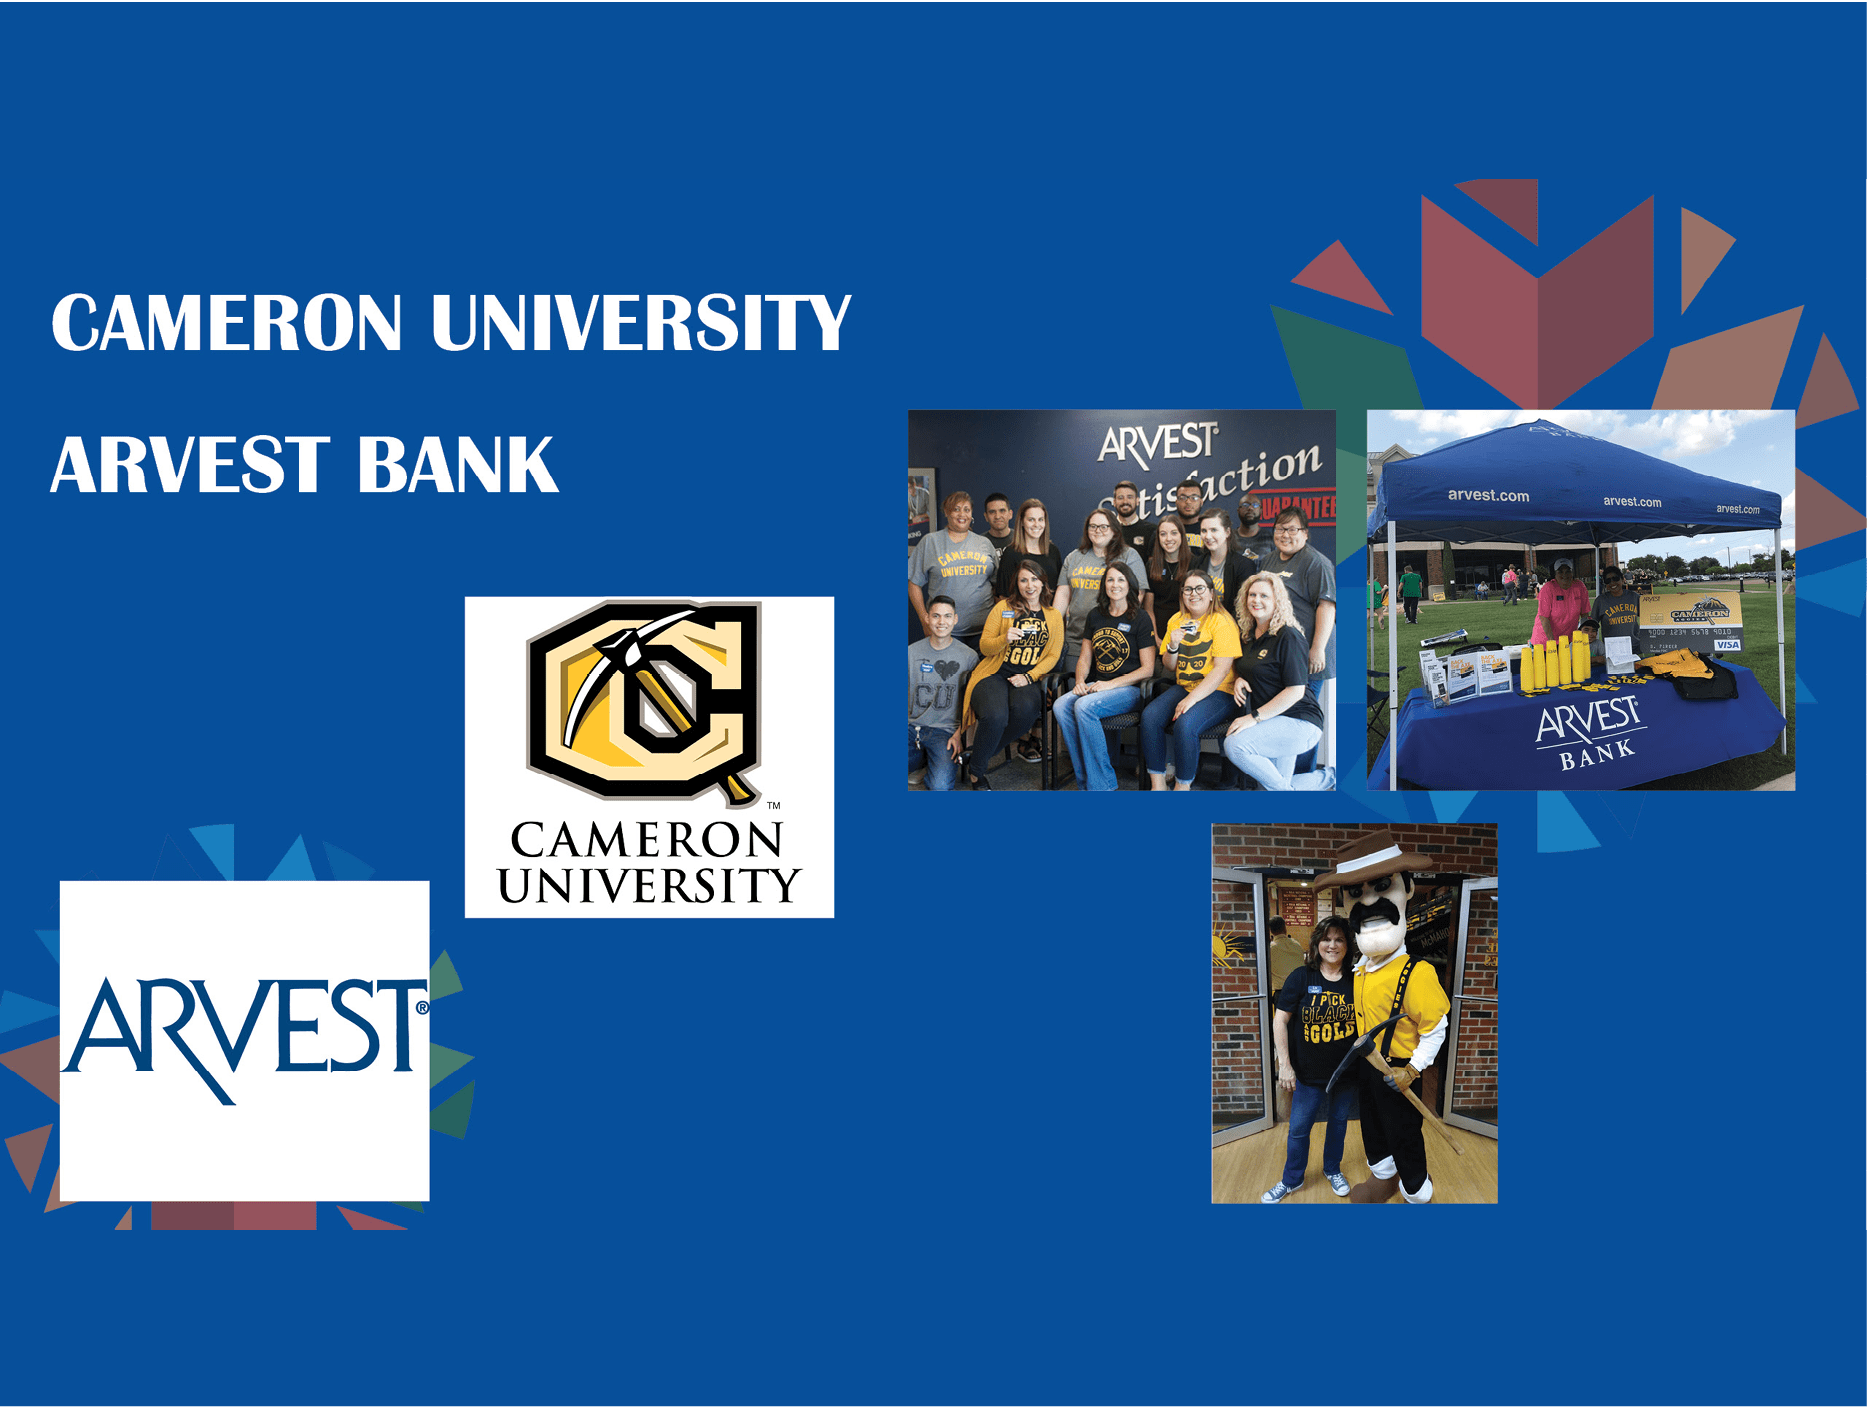 Cameron University and Arvest Bank